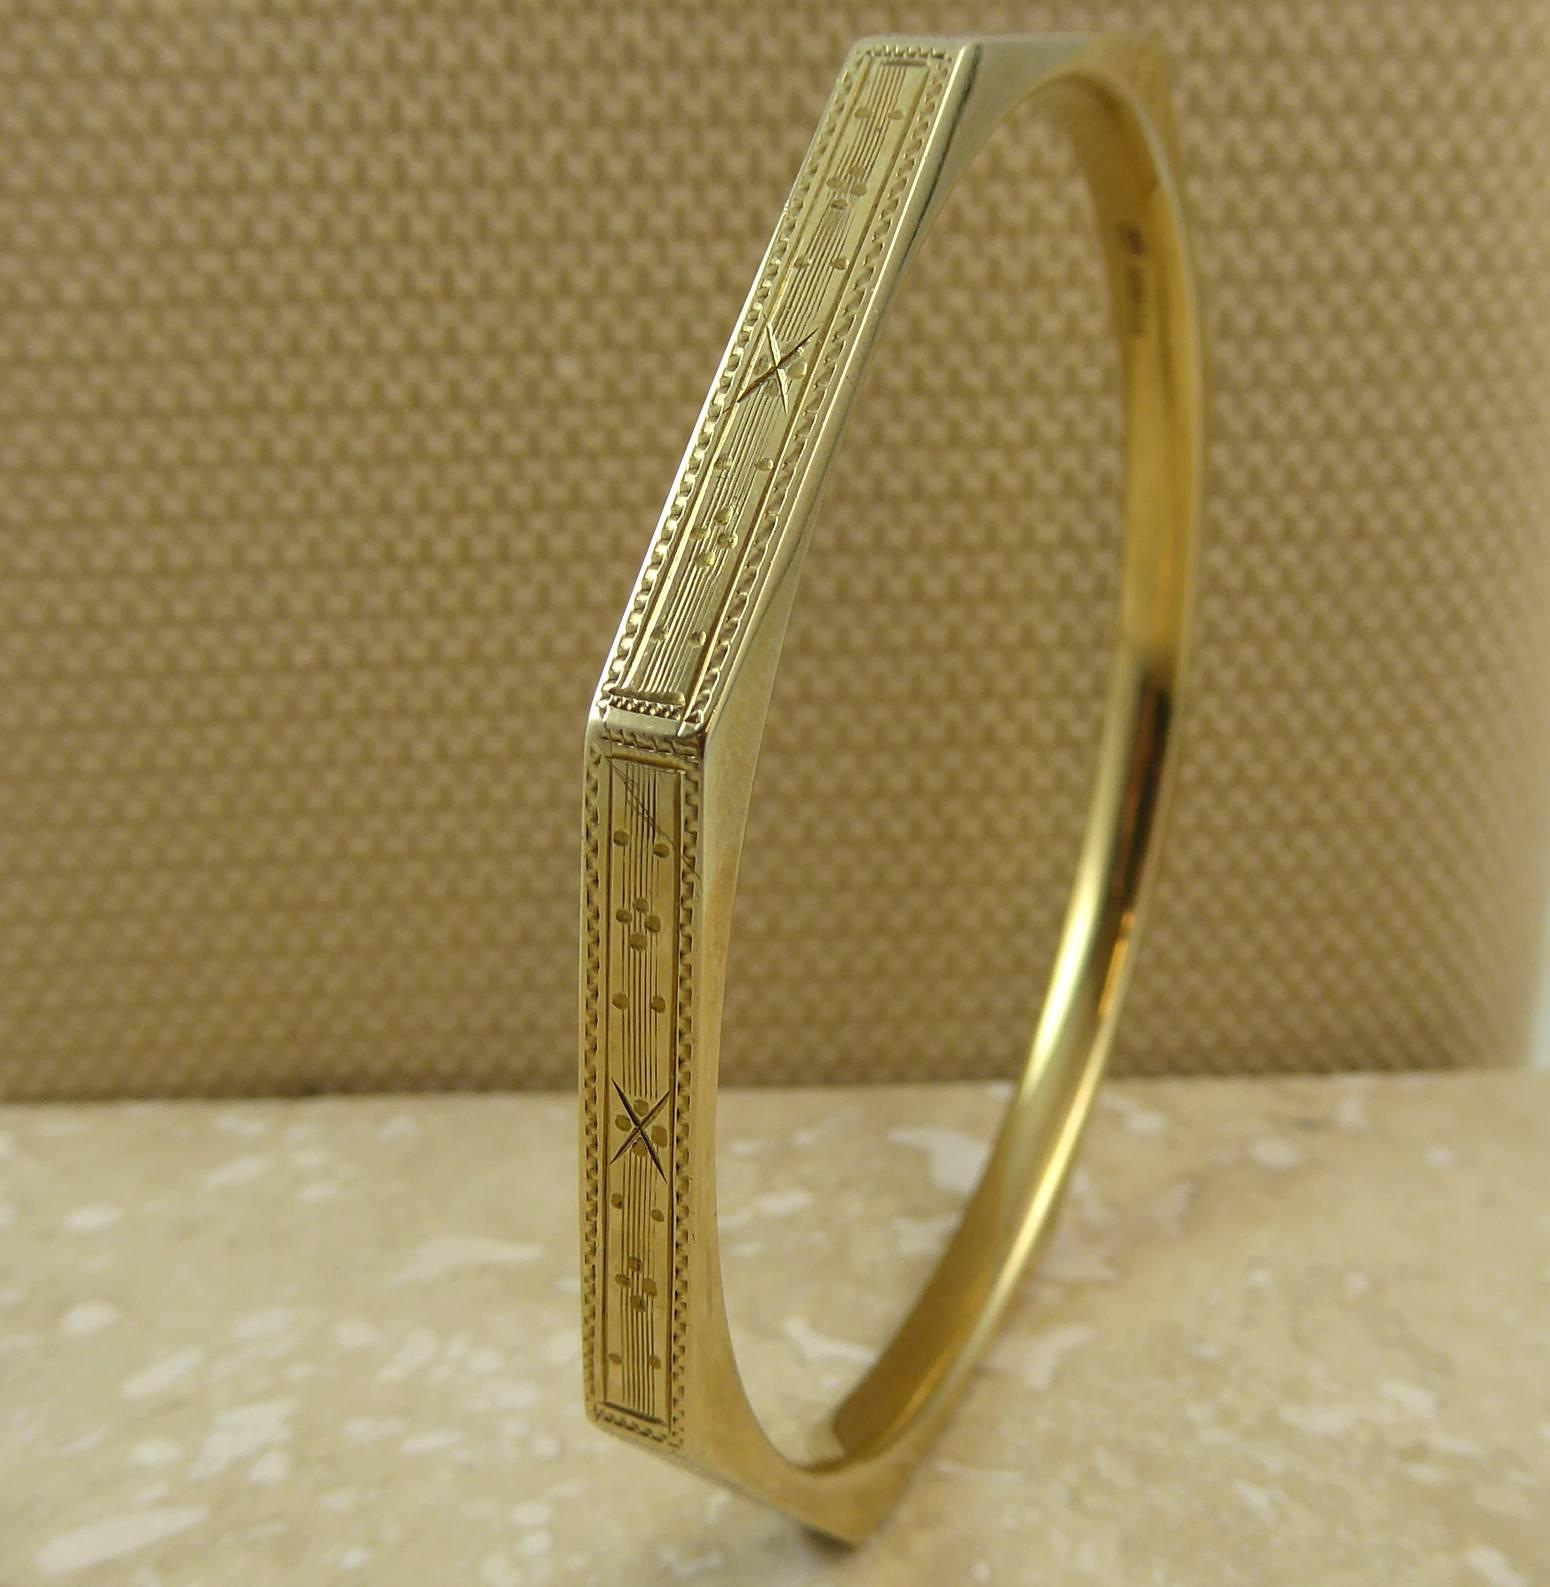 A superb Art Deco slave bangle in a typical angular design.  The outer edge comprises eight hollow rectangular sections which have been adorned with a machine engraved reed and star pattern within a dentil-like border.  

The inside of the bangle is